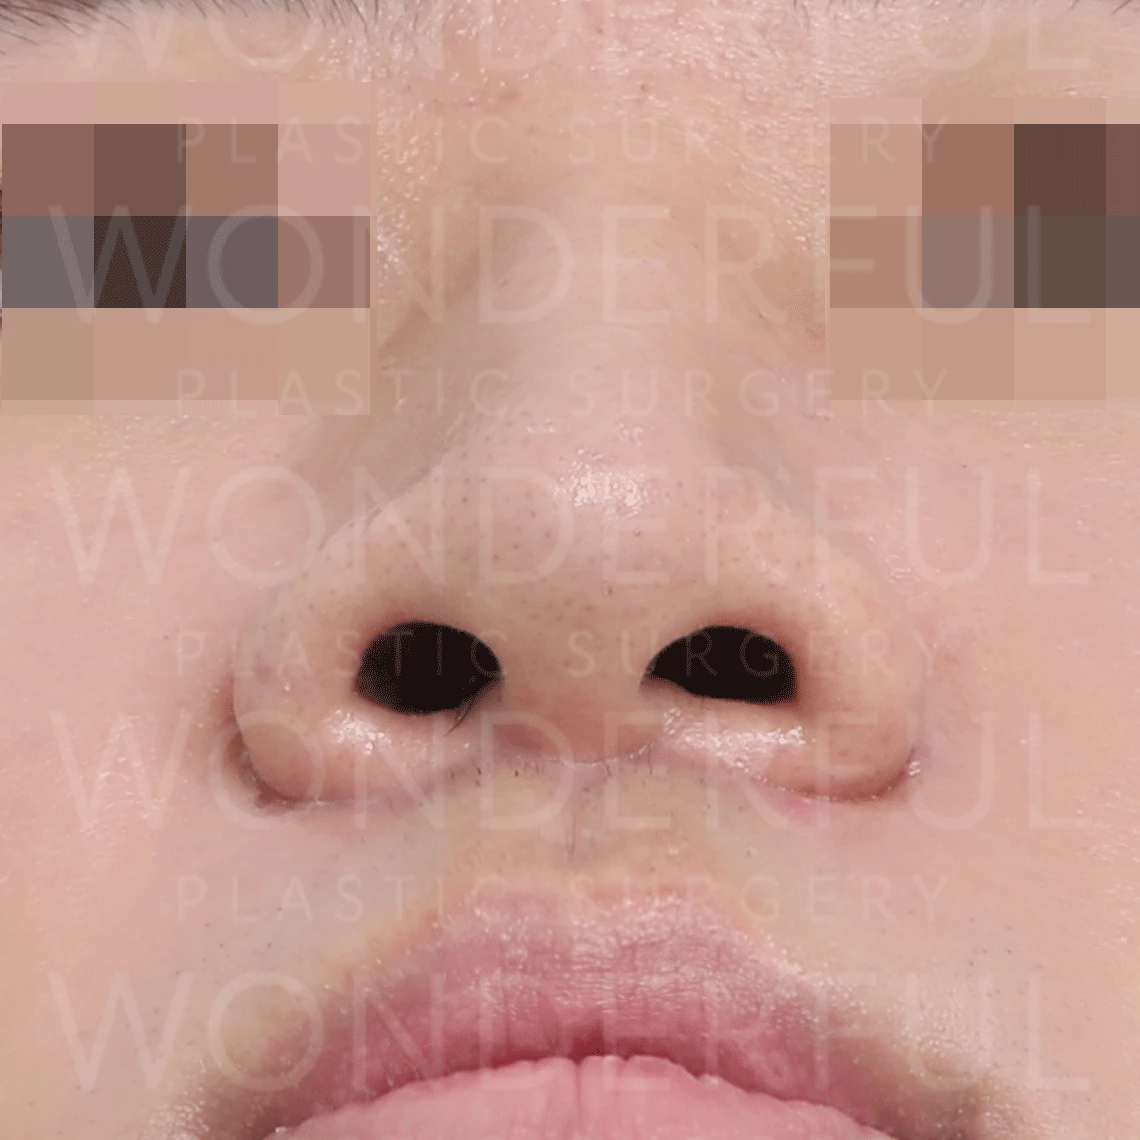 wonderful-plastic-surgery-hospital-in-korea-nostril-alar-reduction-surgery-before-after-results-before-1